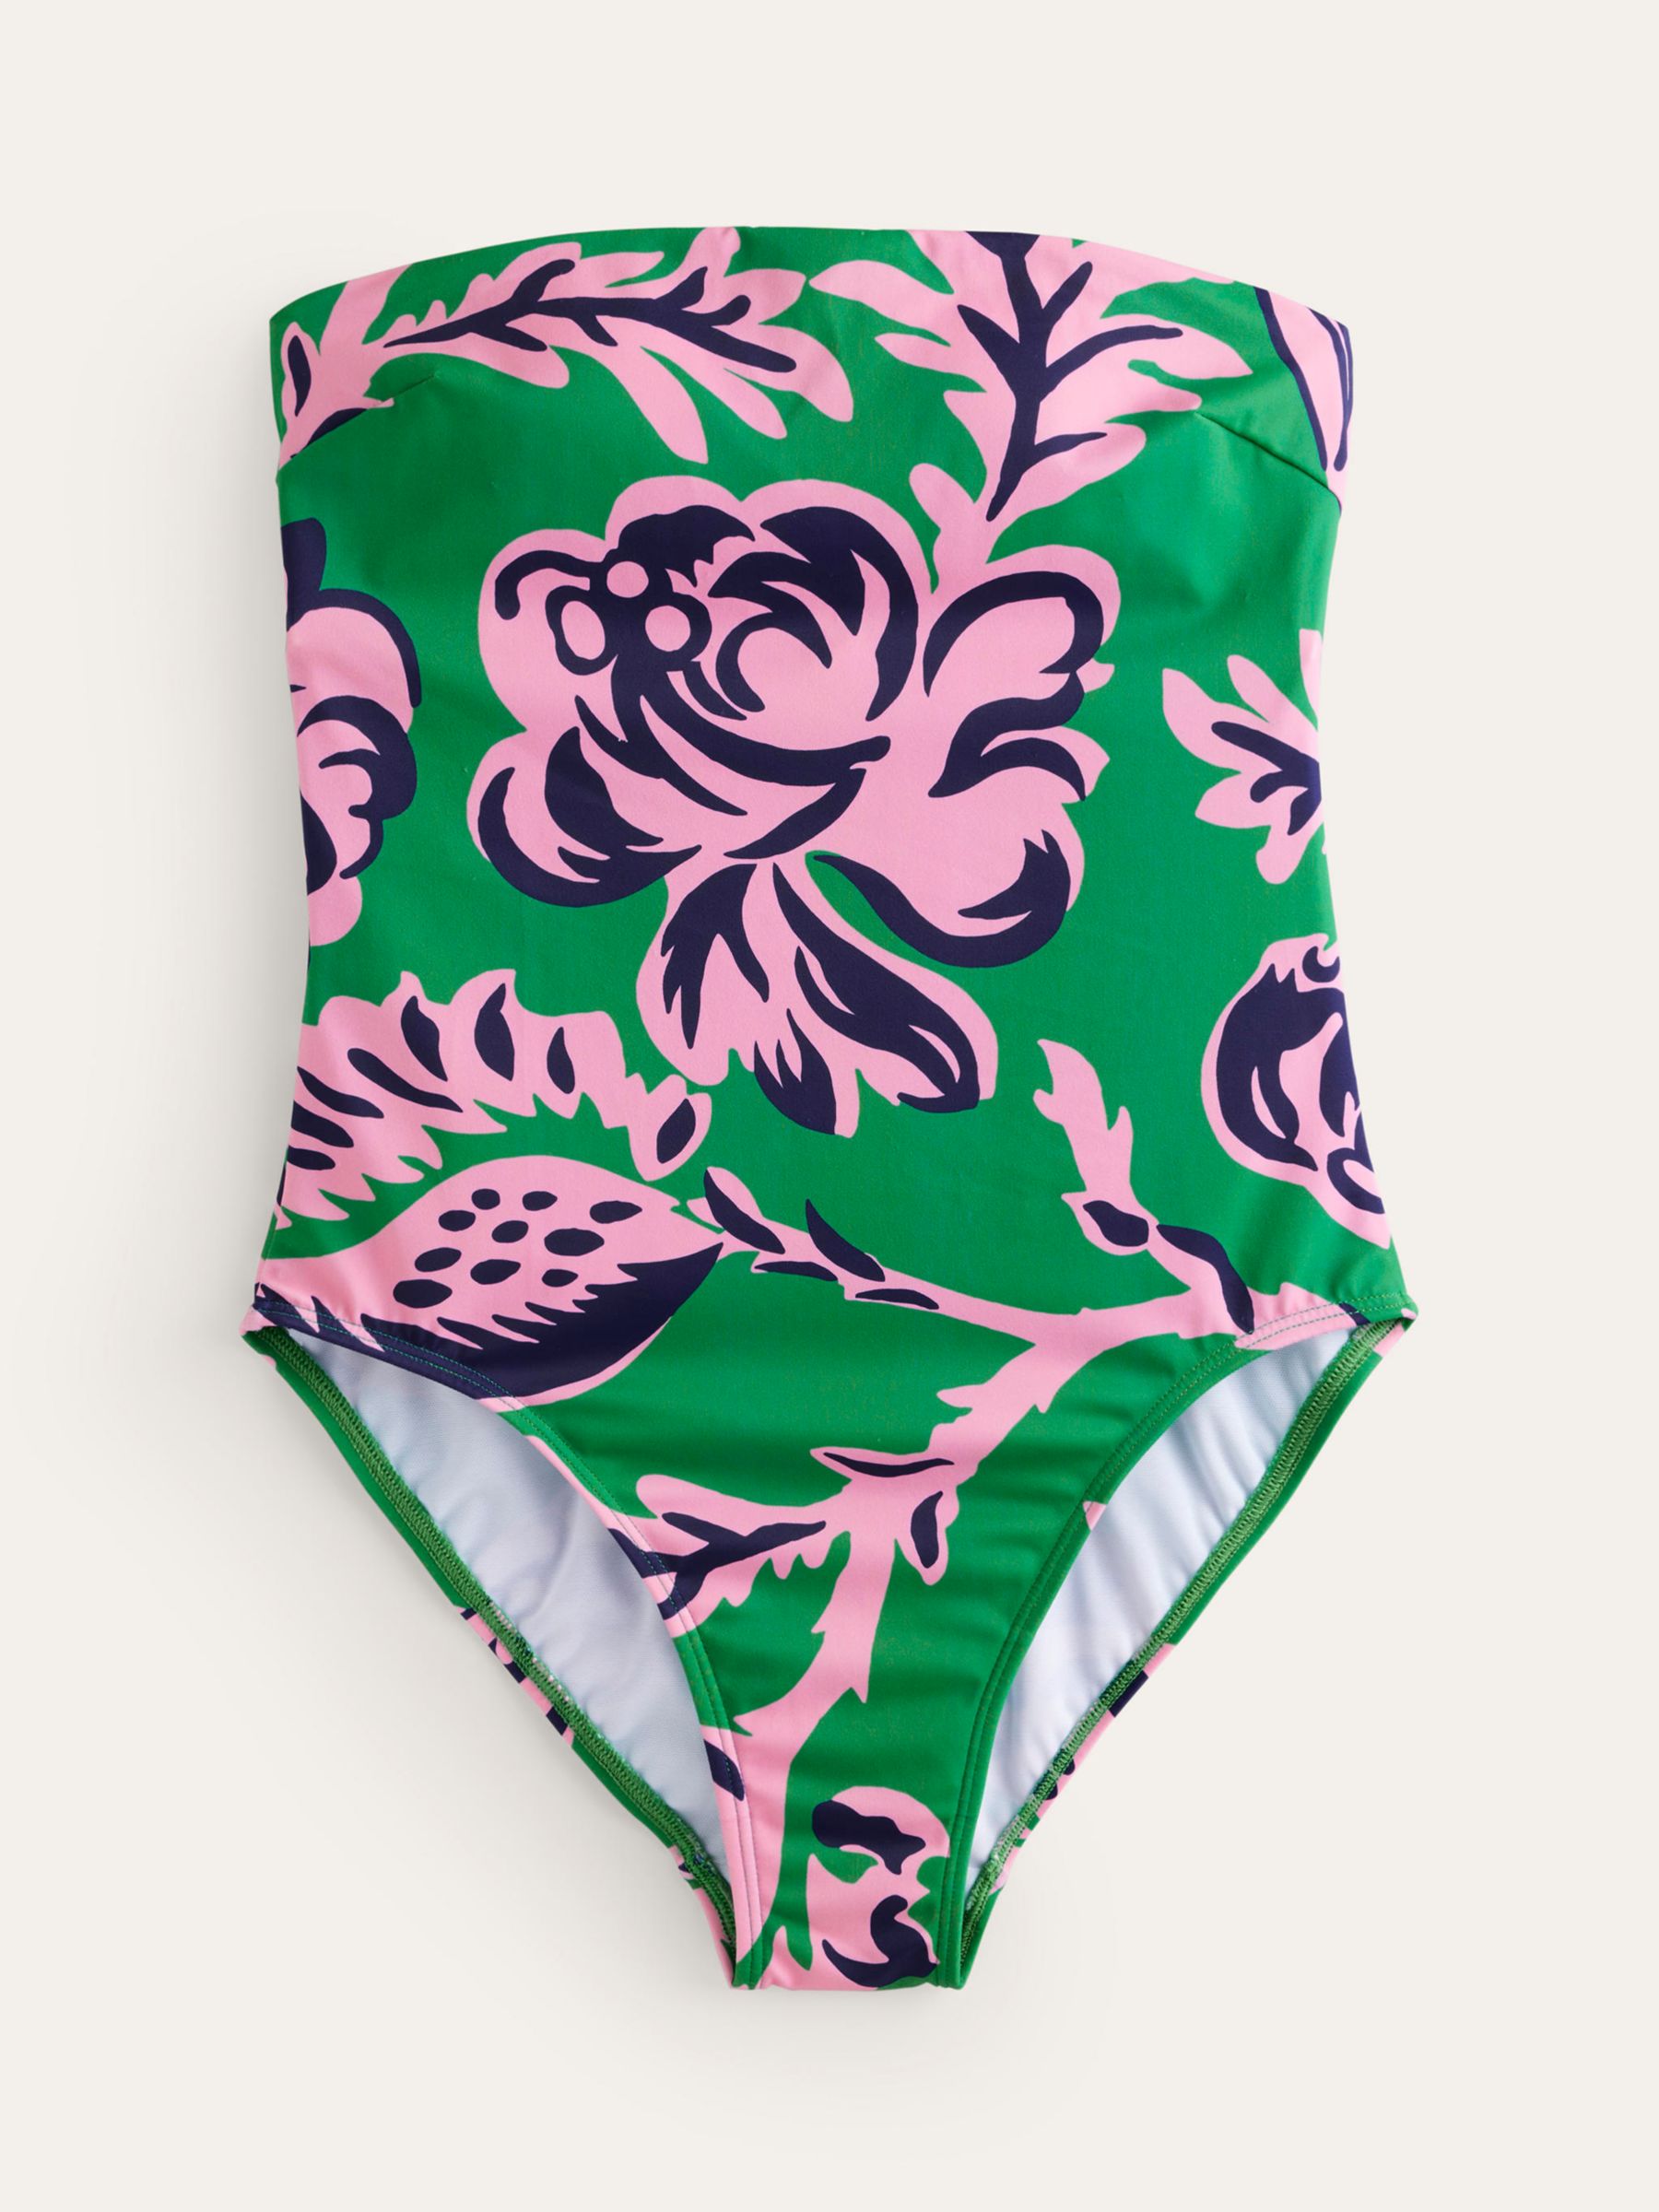 Boden Support Floral Bandeau Swimsuit, Green/Rose Blush, 34A